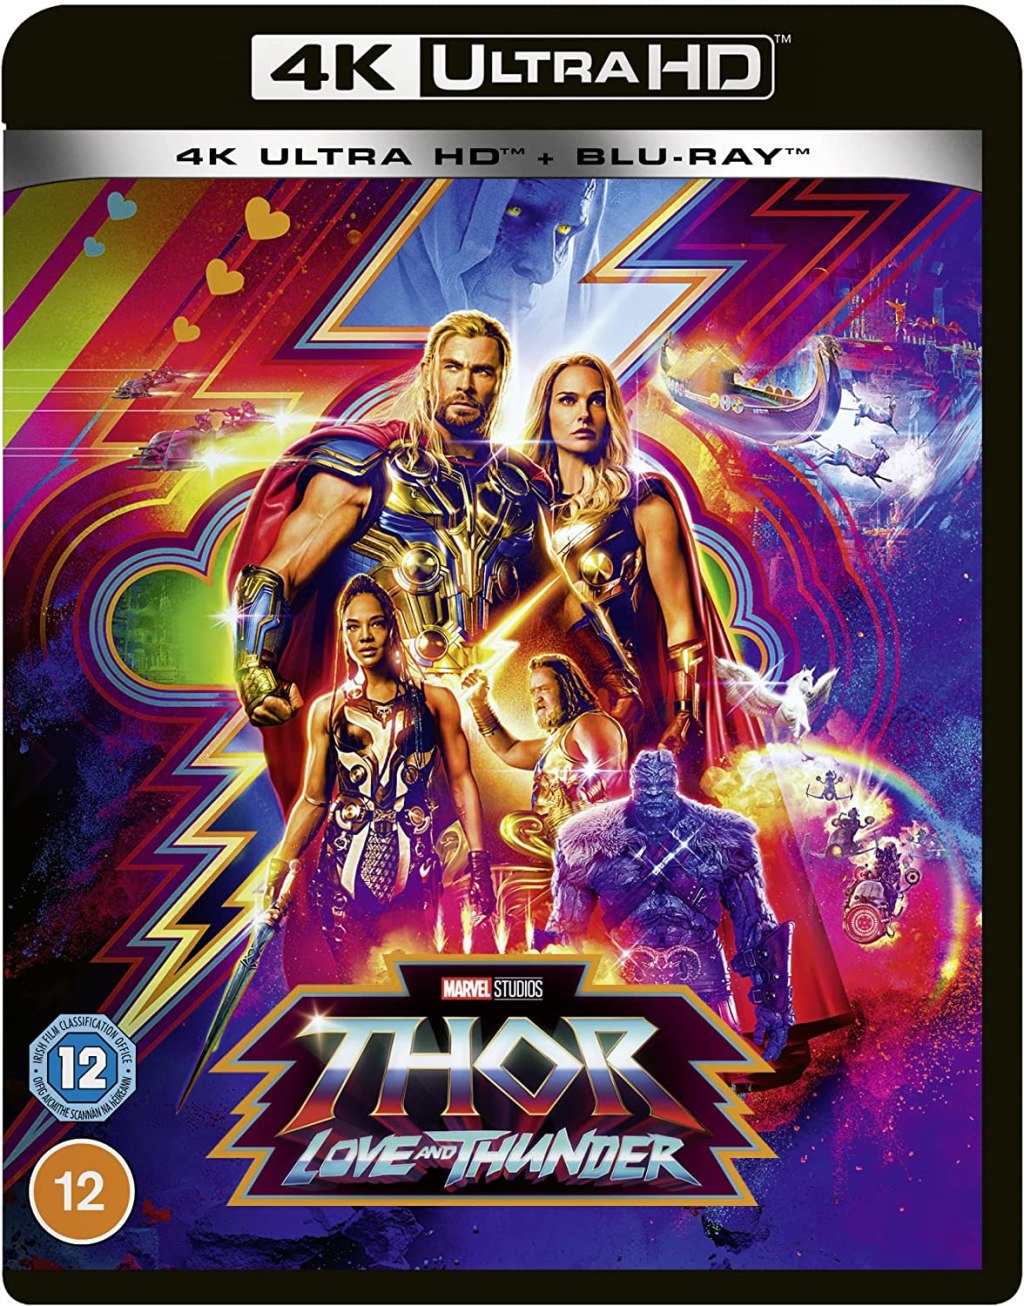 Win Thor: Love and Thunder on 4K UHD and a signed poster! **COMPETITION CLOSED**